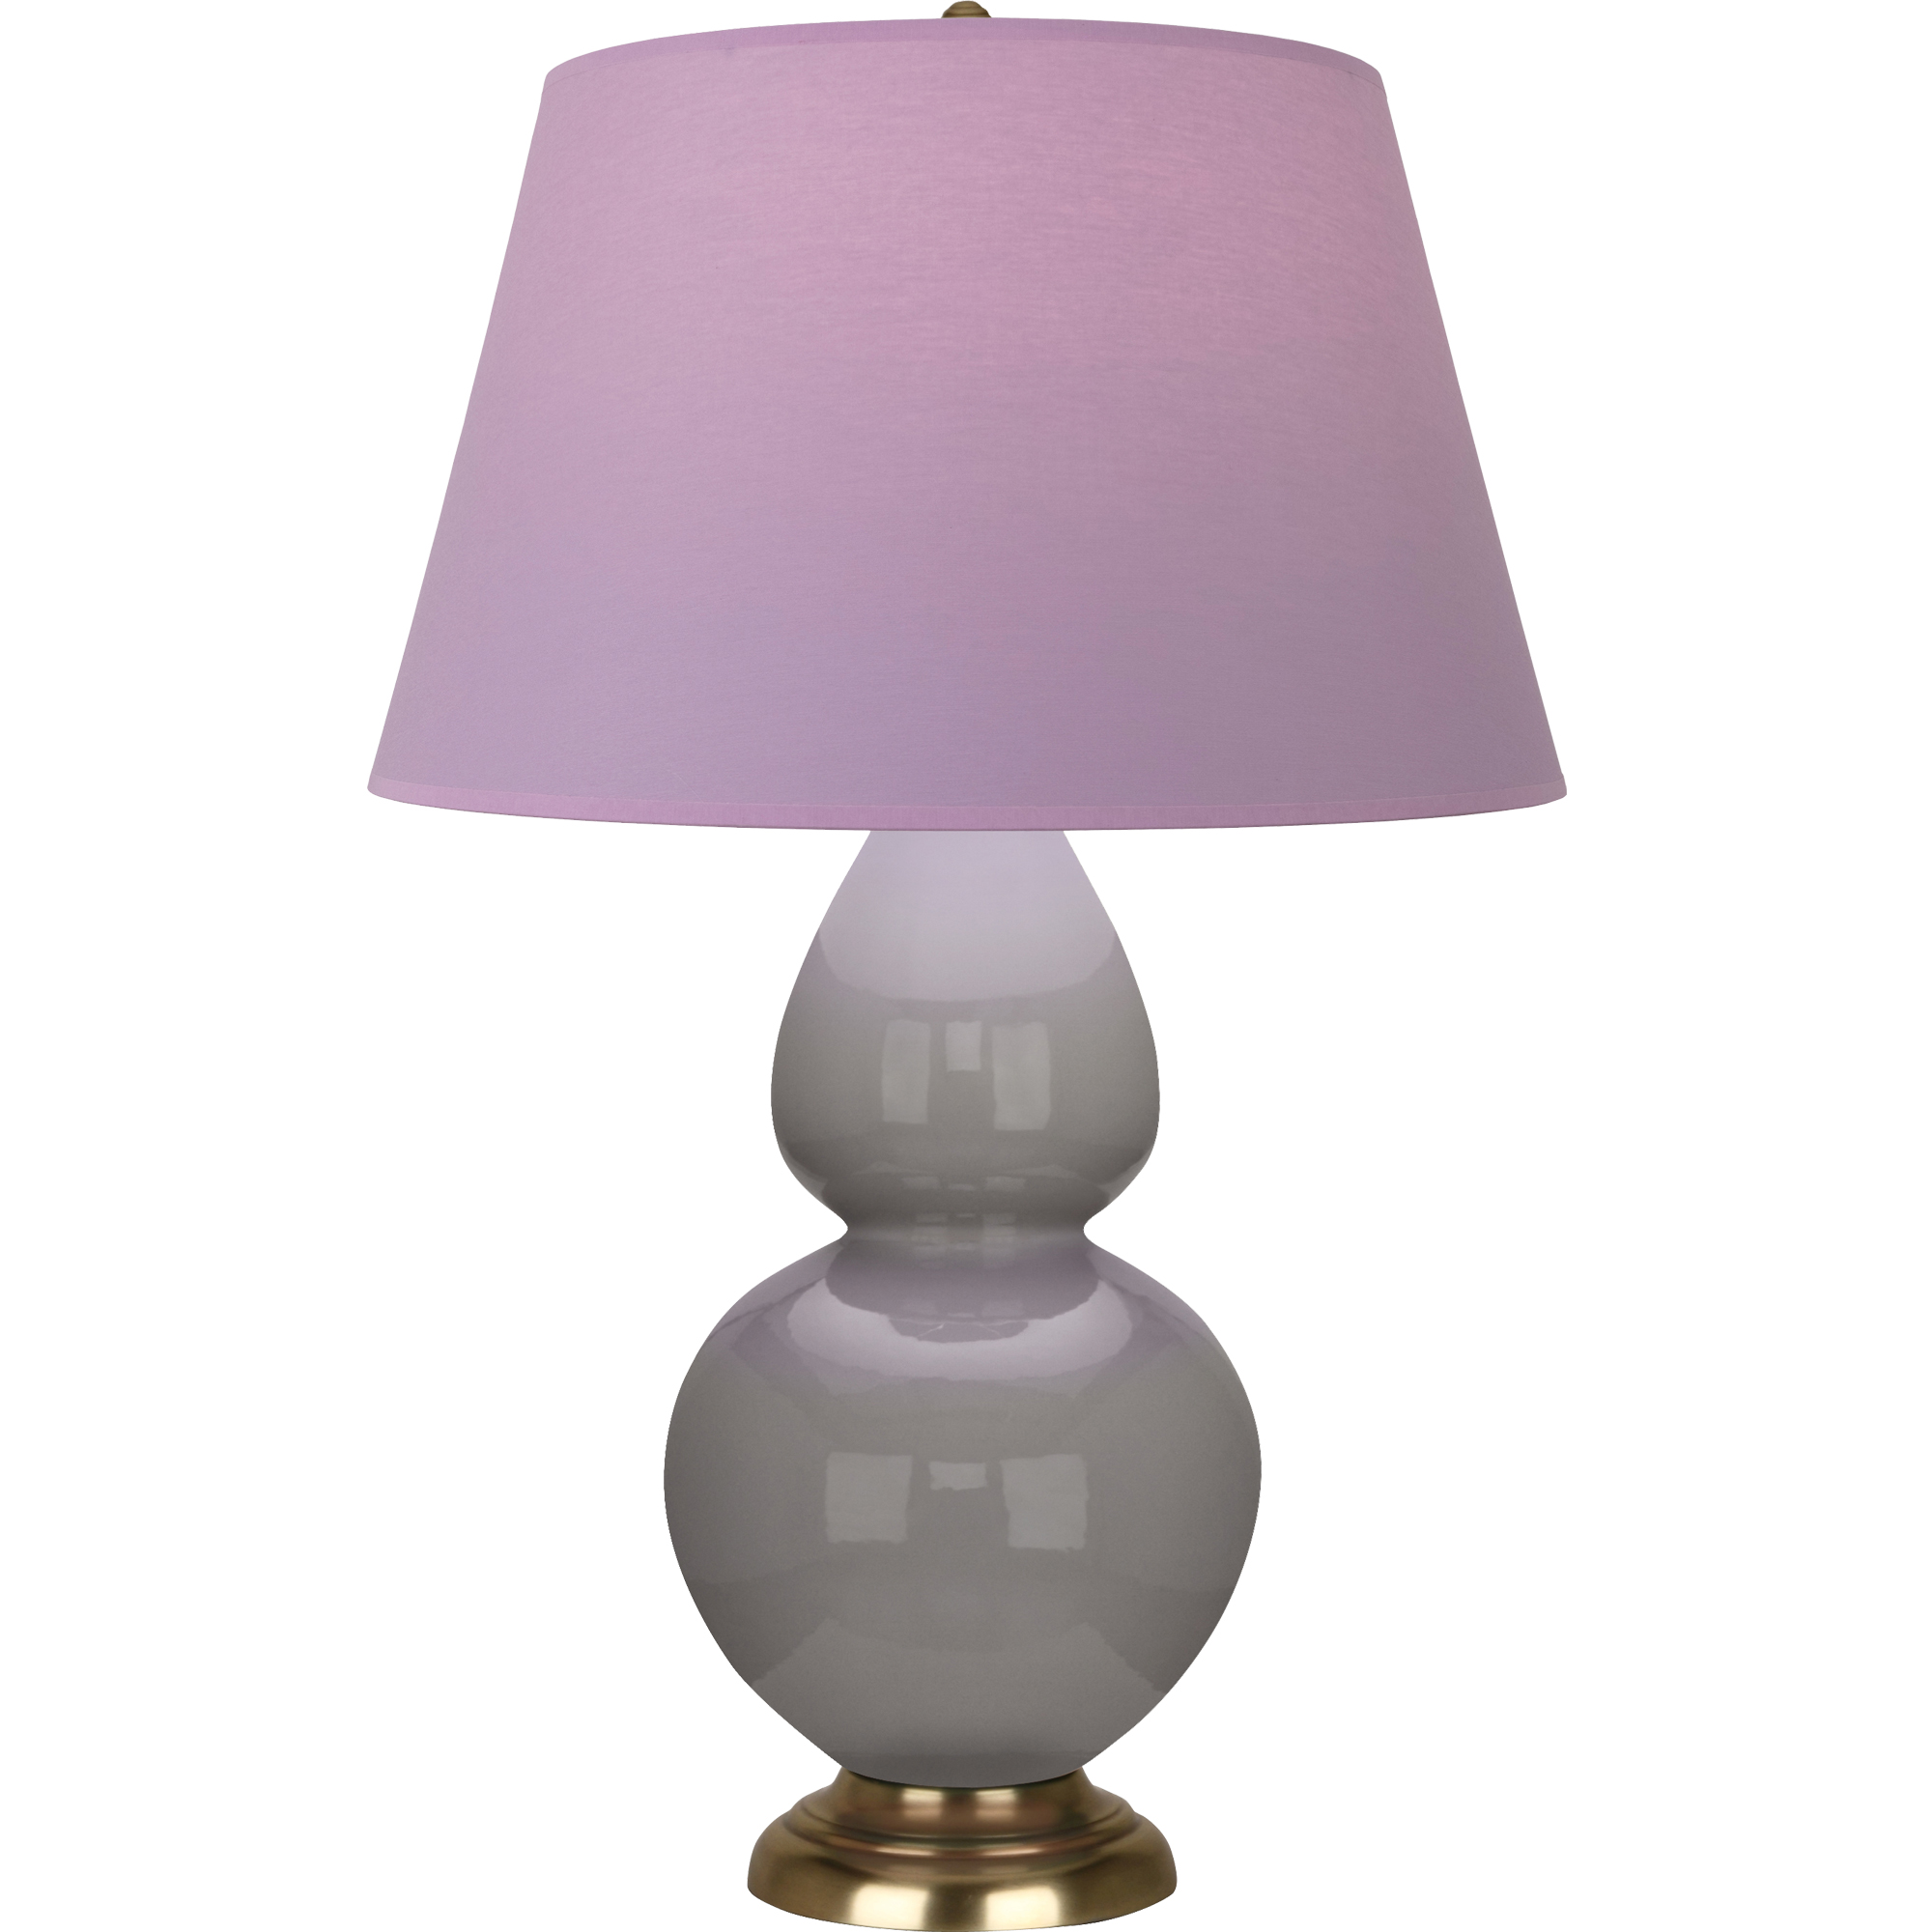 Double Gourd Table Lamp Style #1748L